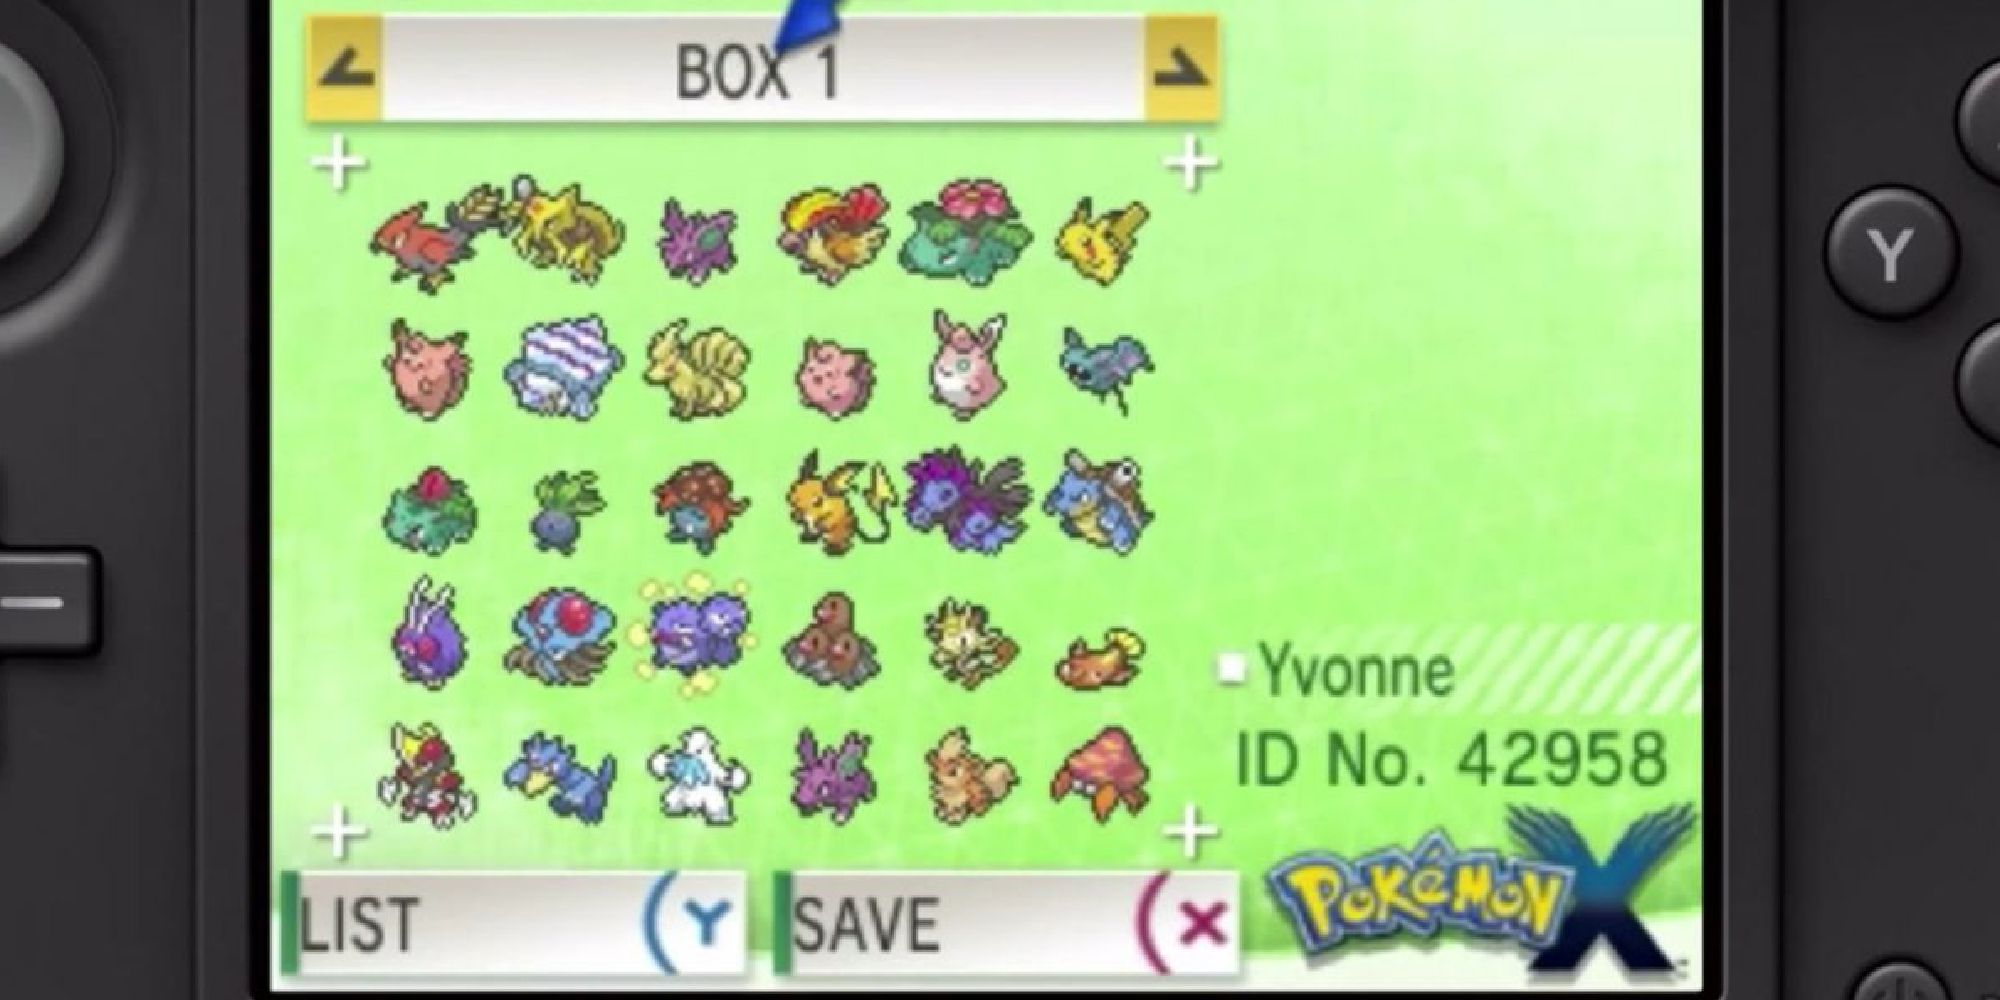 Footage of Pokemon Bank's bottom screen when connected to Pokemon X on the 3DS